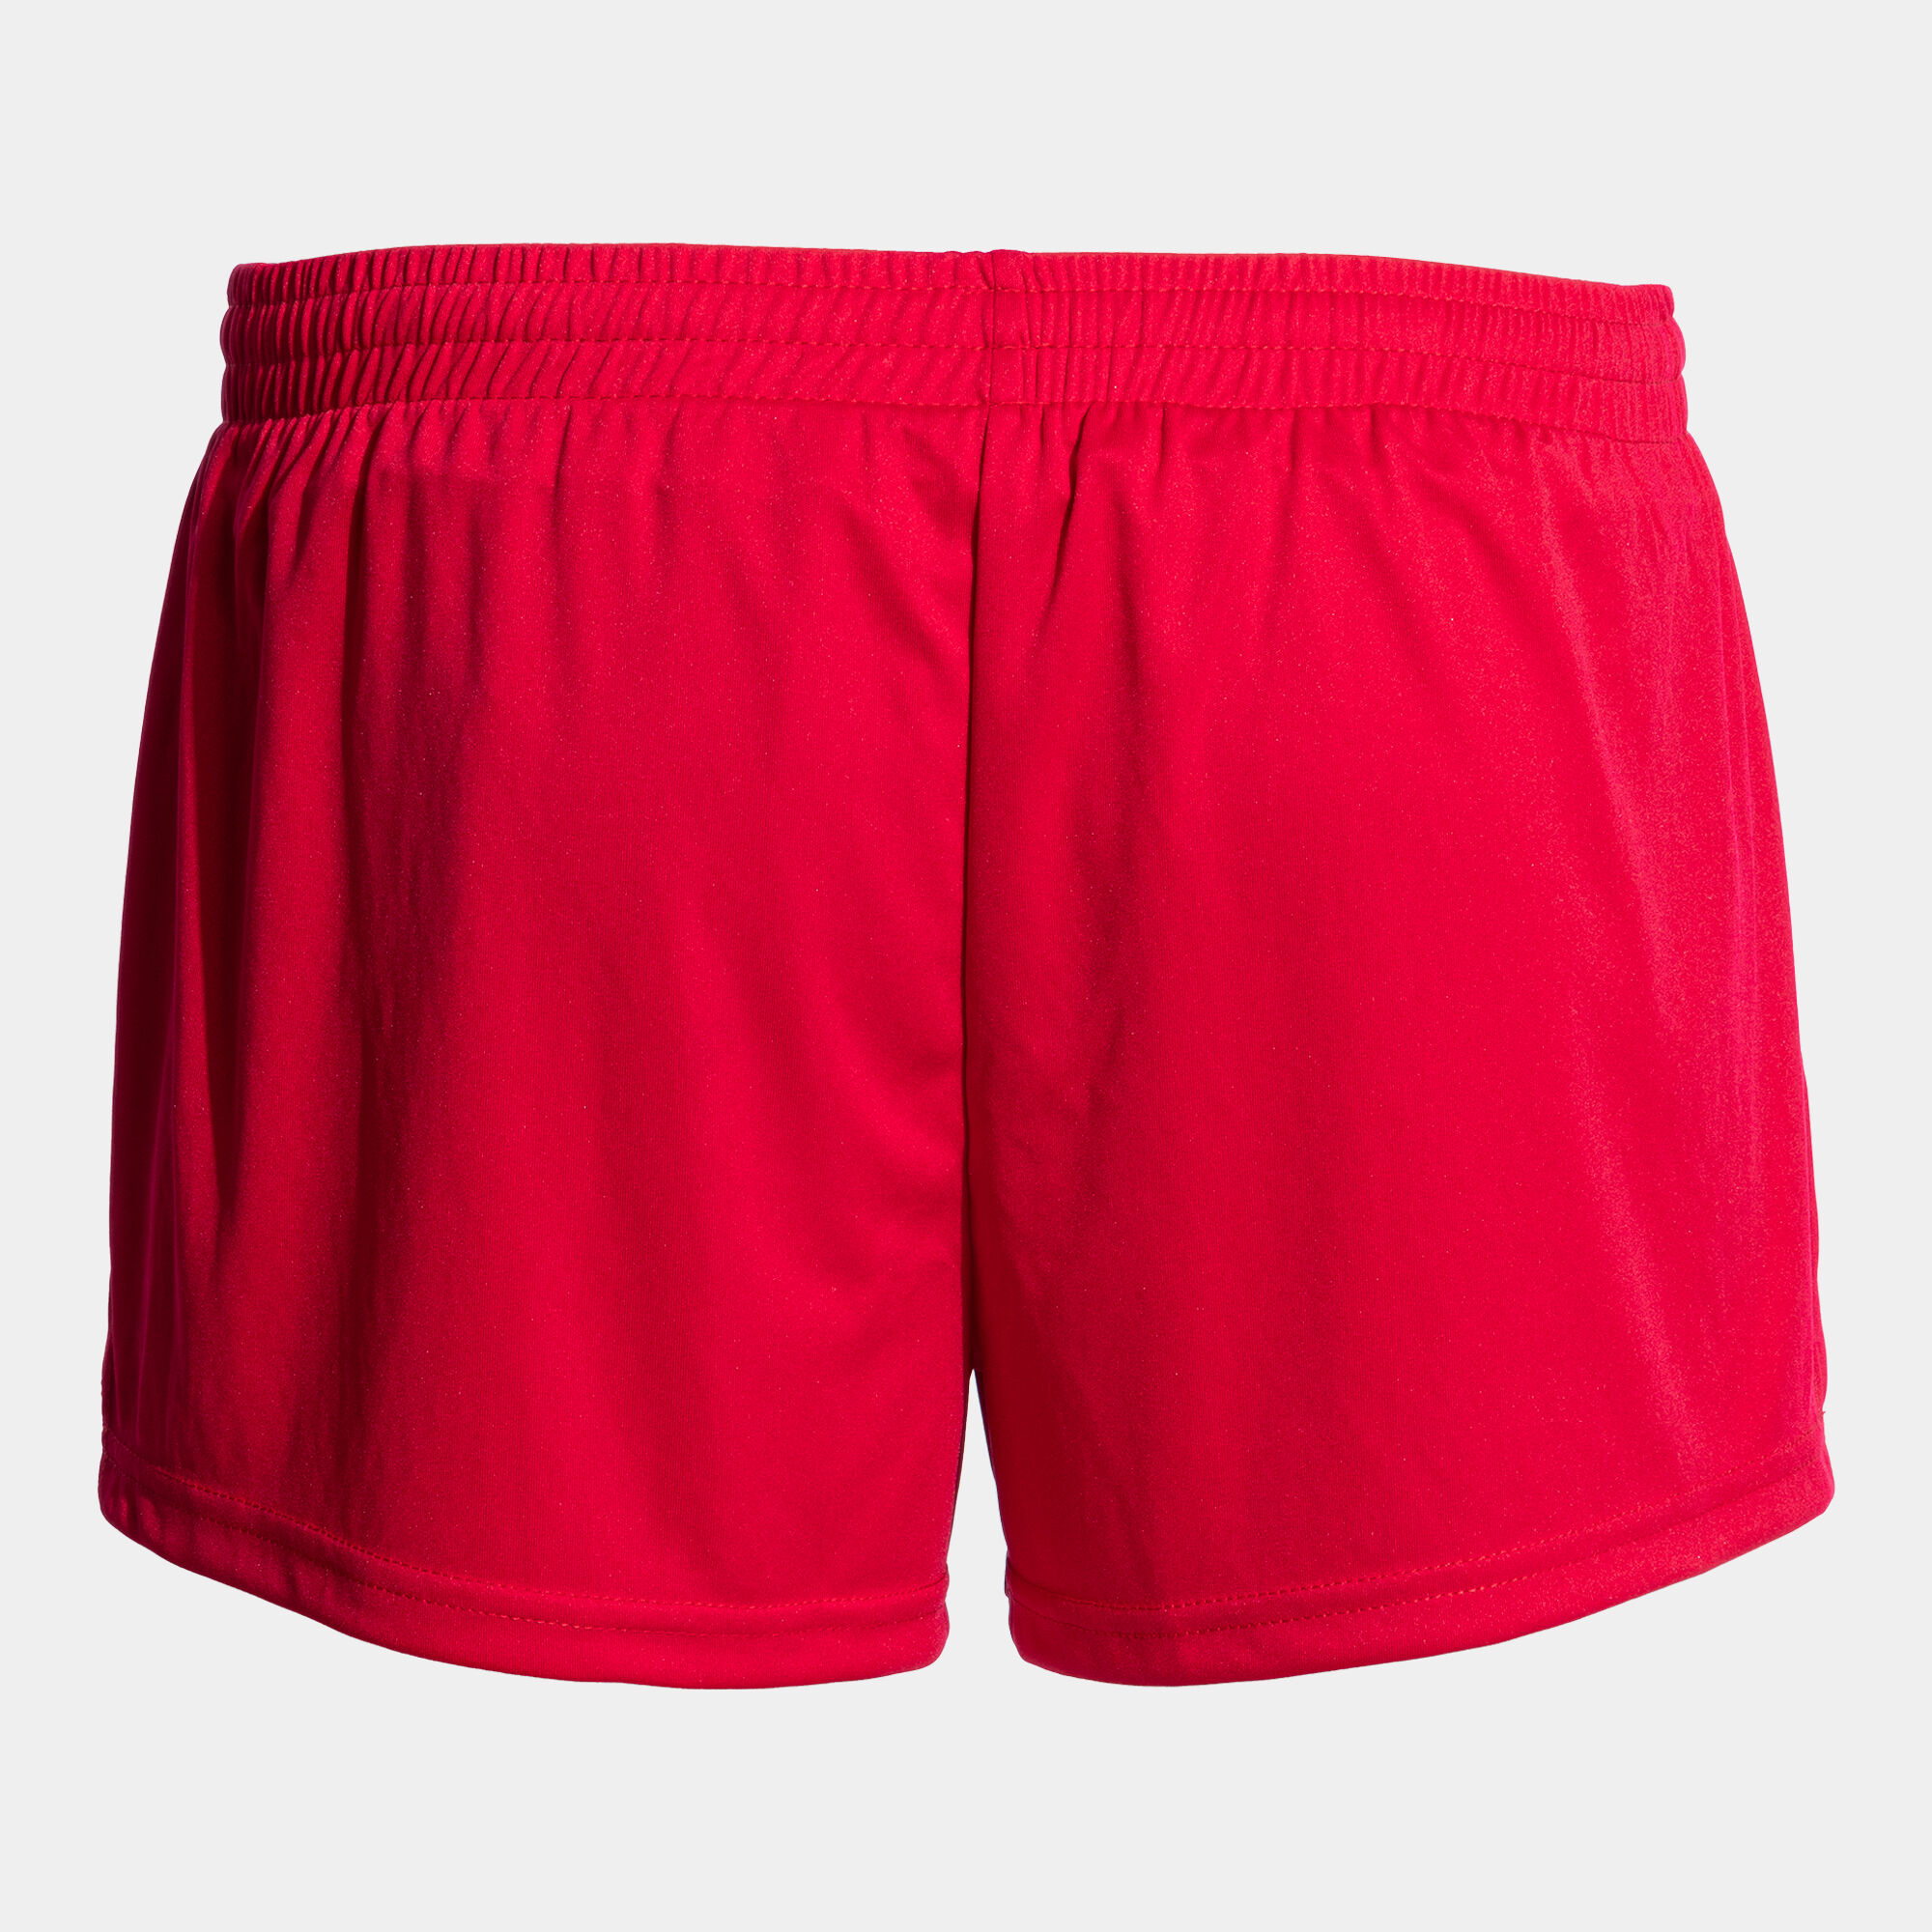 Shorts man Record II red